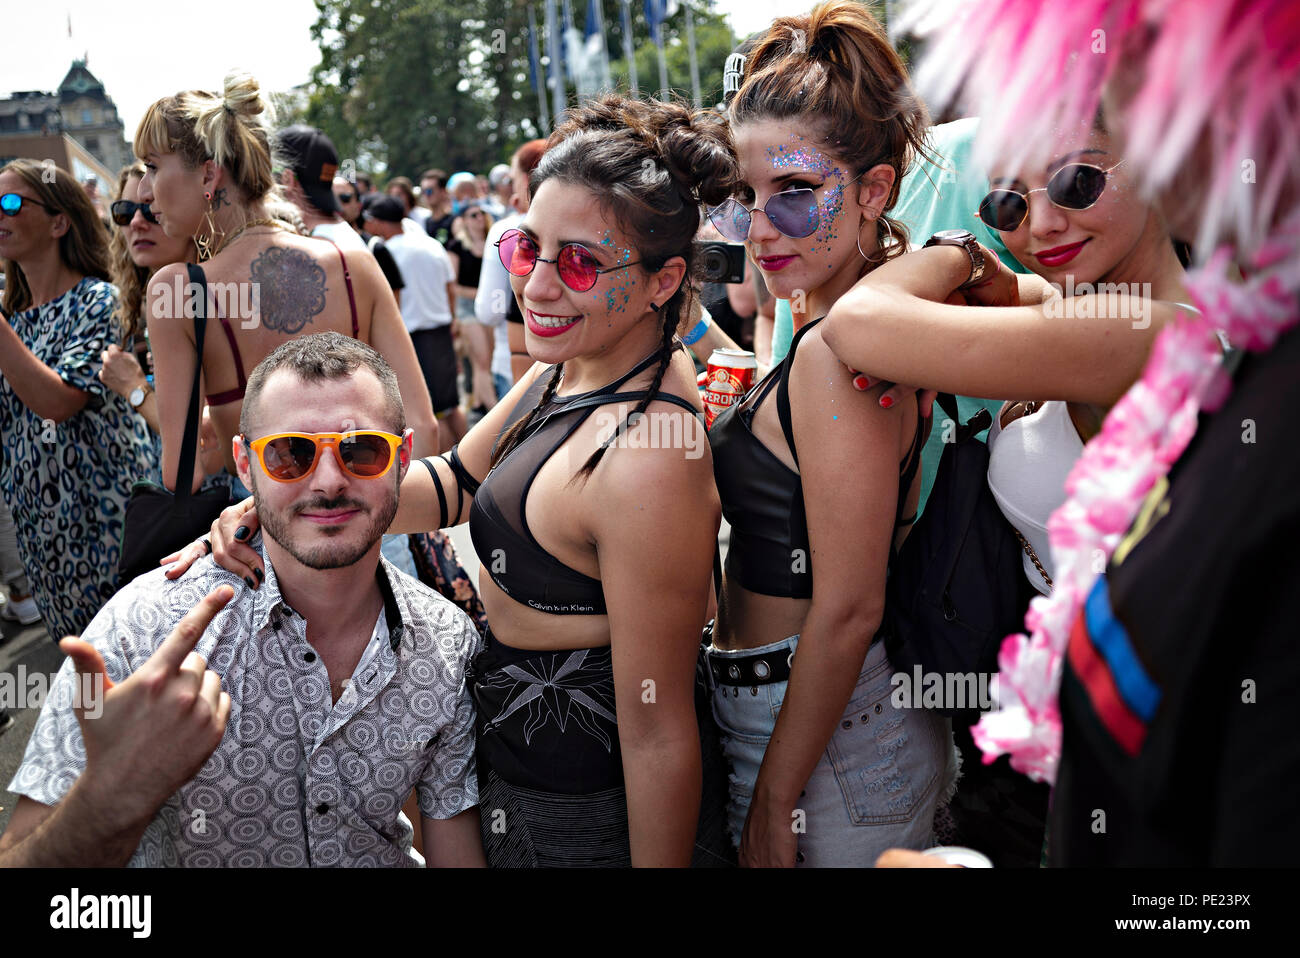 Zurich, Switzerland. 11th Aug, 2018. People participate in the 27th Zurich Street Parade in central Zurich, Switzerland, Aug. 11, 2018. With this year's motto 'Culture of Tolerance', the annual dance music event Street Parade was held in Zurich on Saturday, attracting about one million participants. Credit: Michele Limina/Xinhua/Alamy Live News Stock Photo